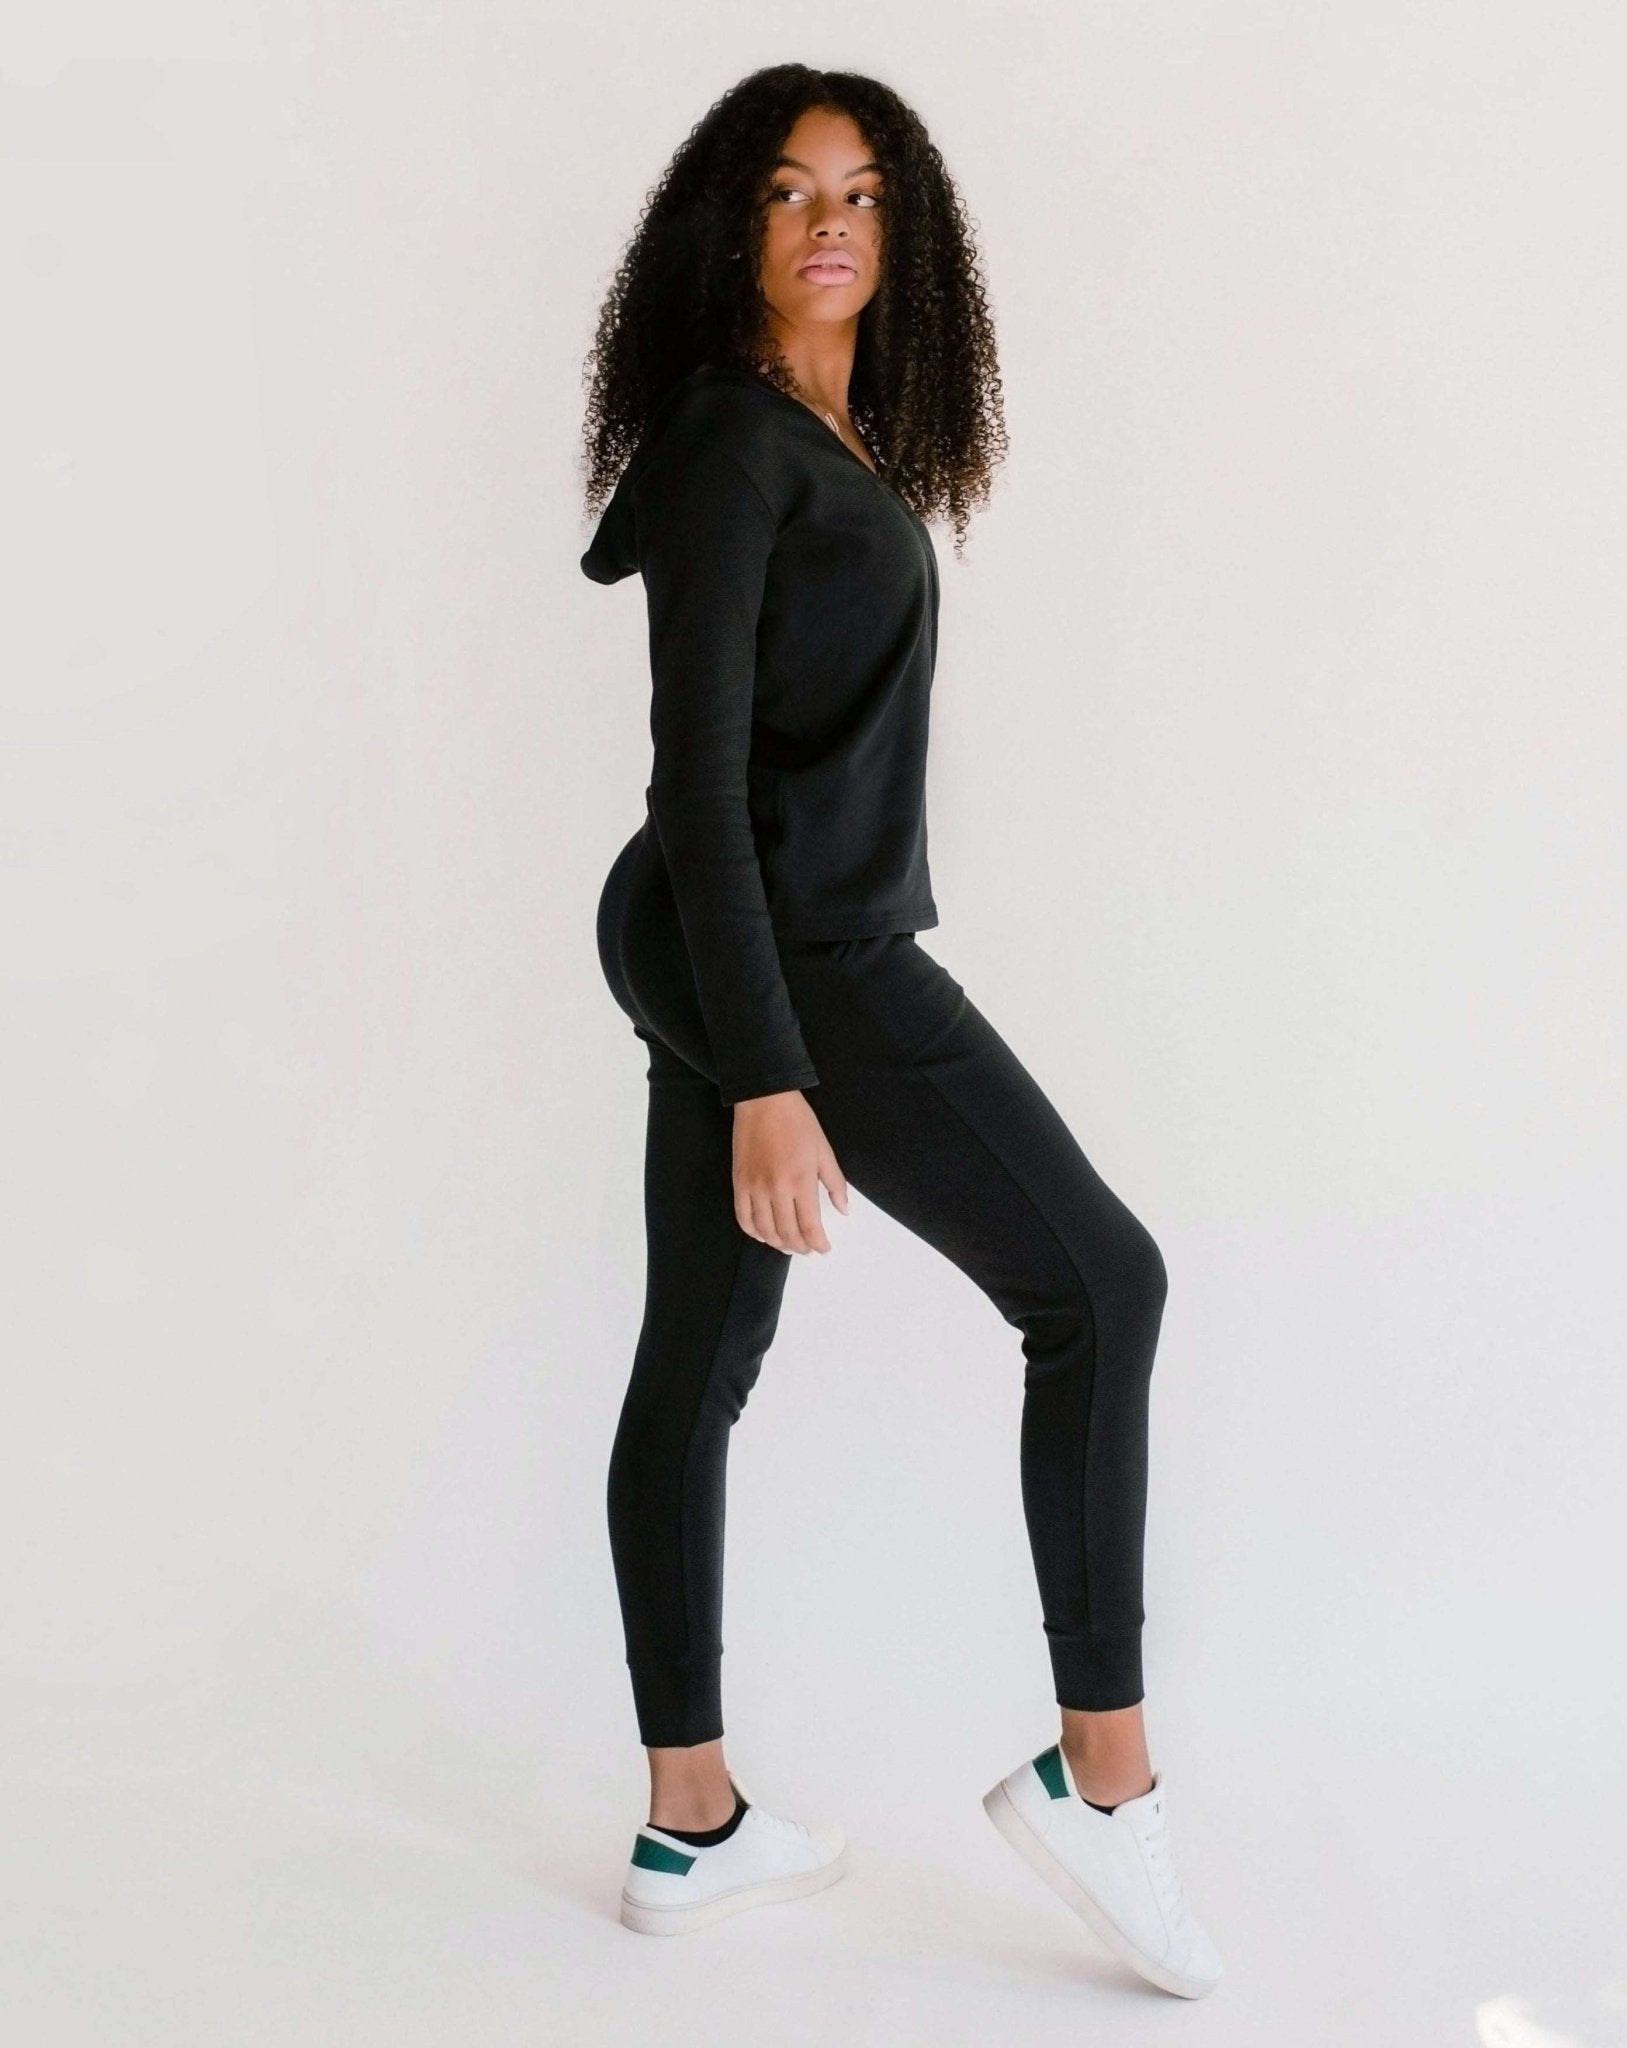 AMRIJ MODERN FIT Discover this supportive, comfortable loungewear